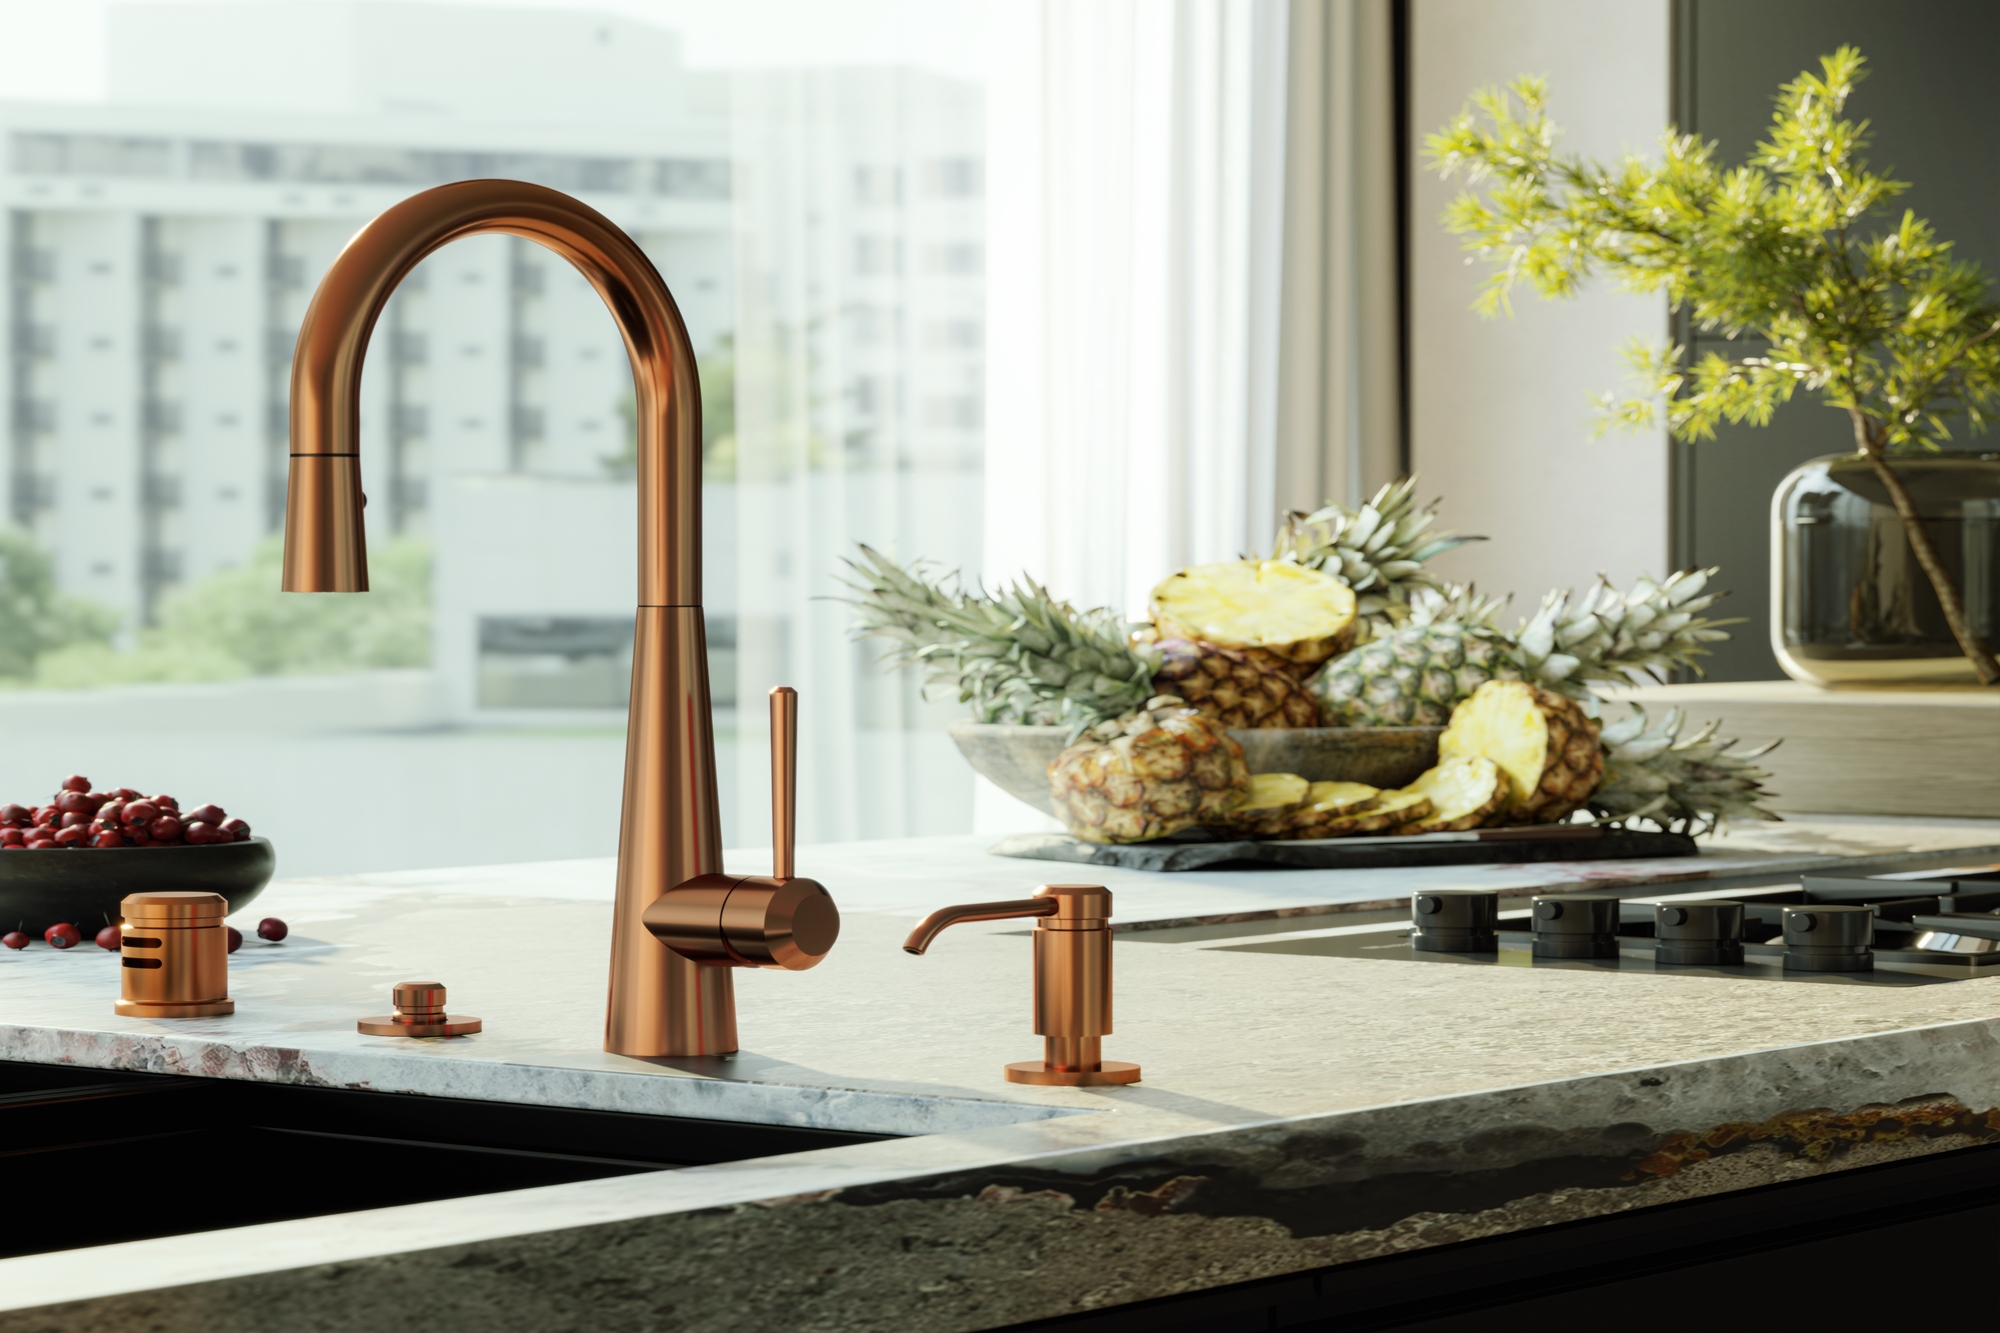 GRAFF introduces new kitchen faucet collections